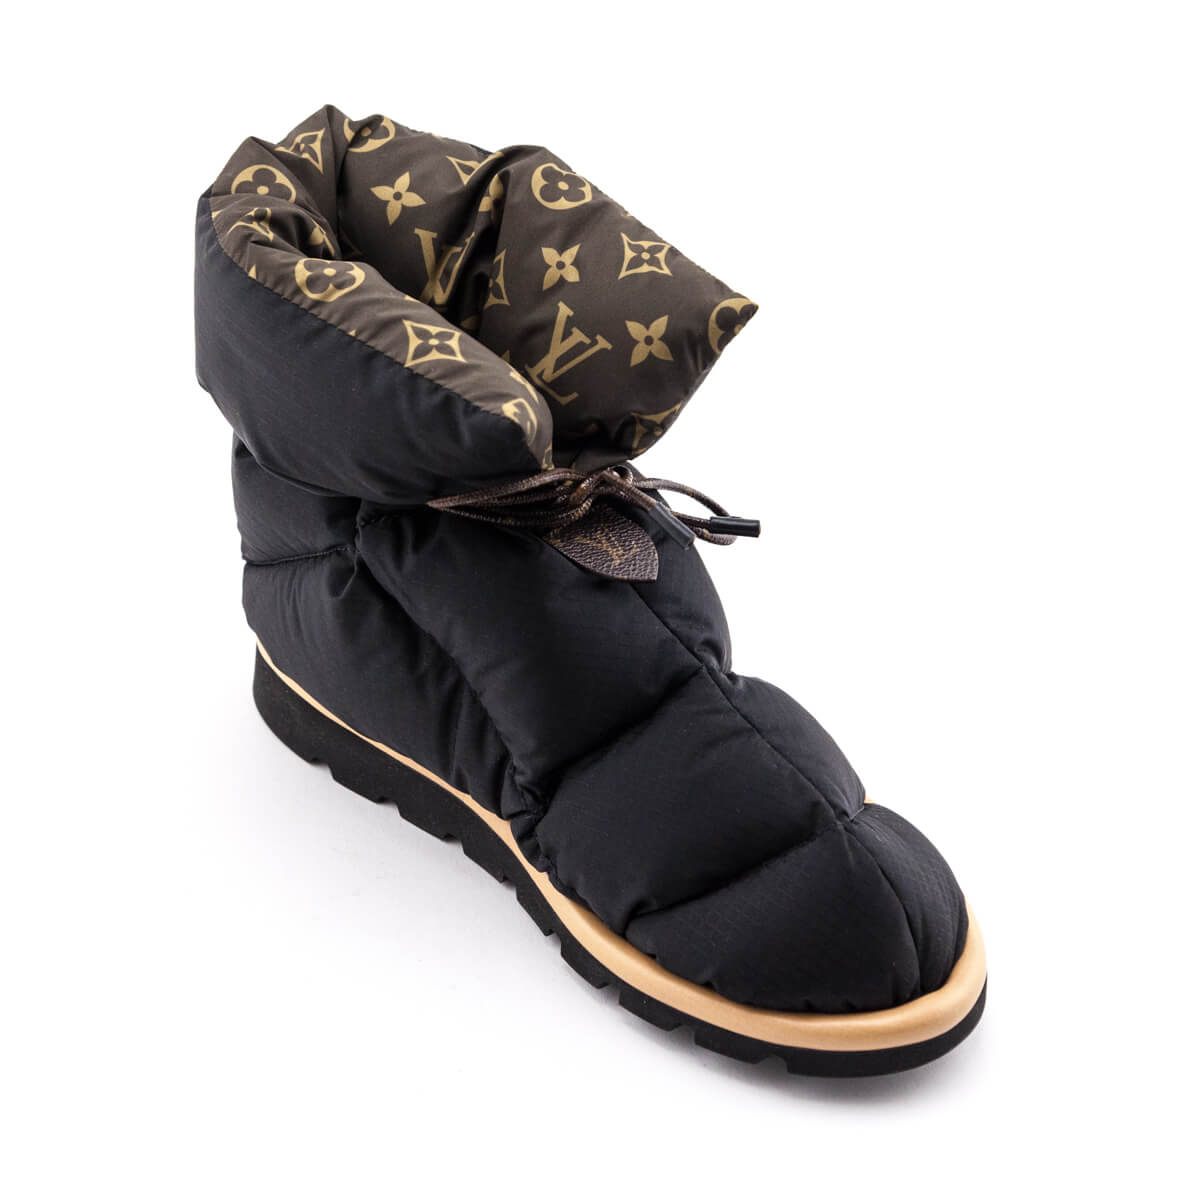 Leather snow boots Louis Vuitton Black size 39 EU in Leather